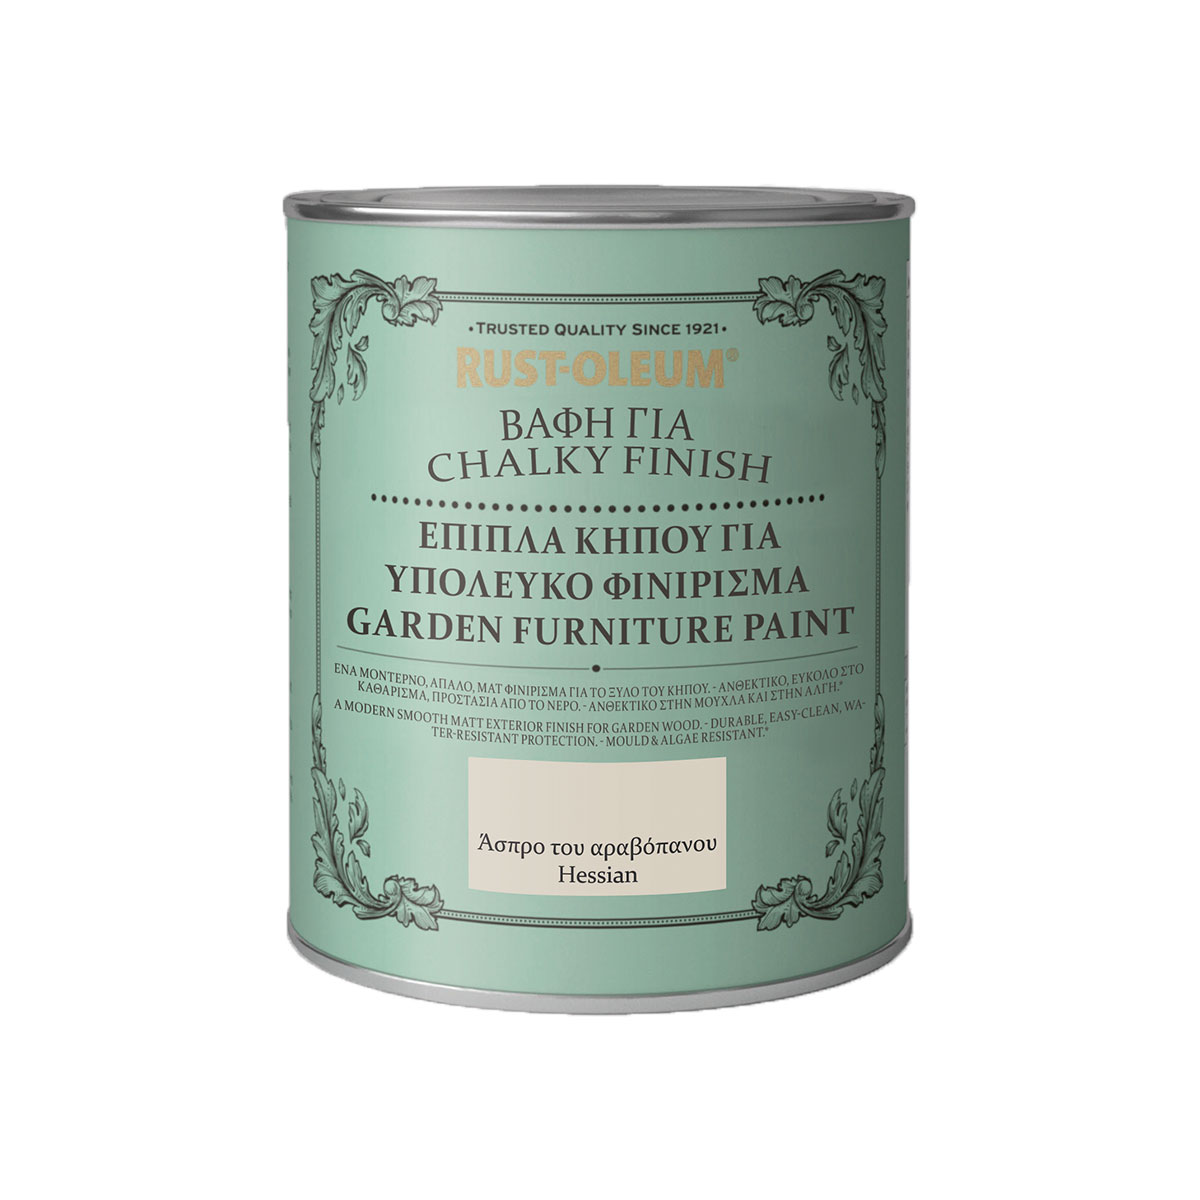 CHALKY FINISH GARDEN FURNITURE PAINT